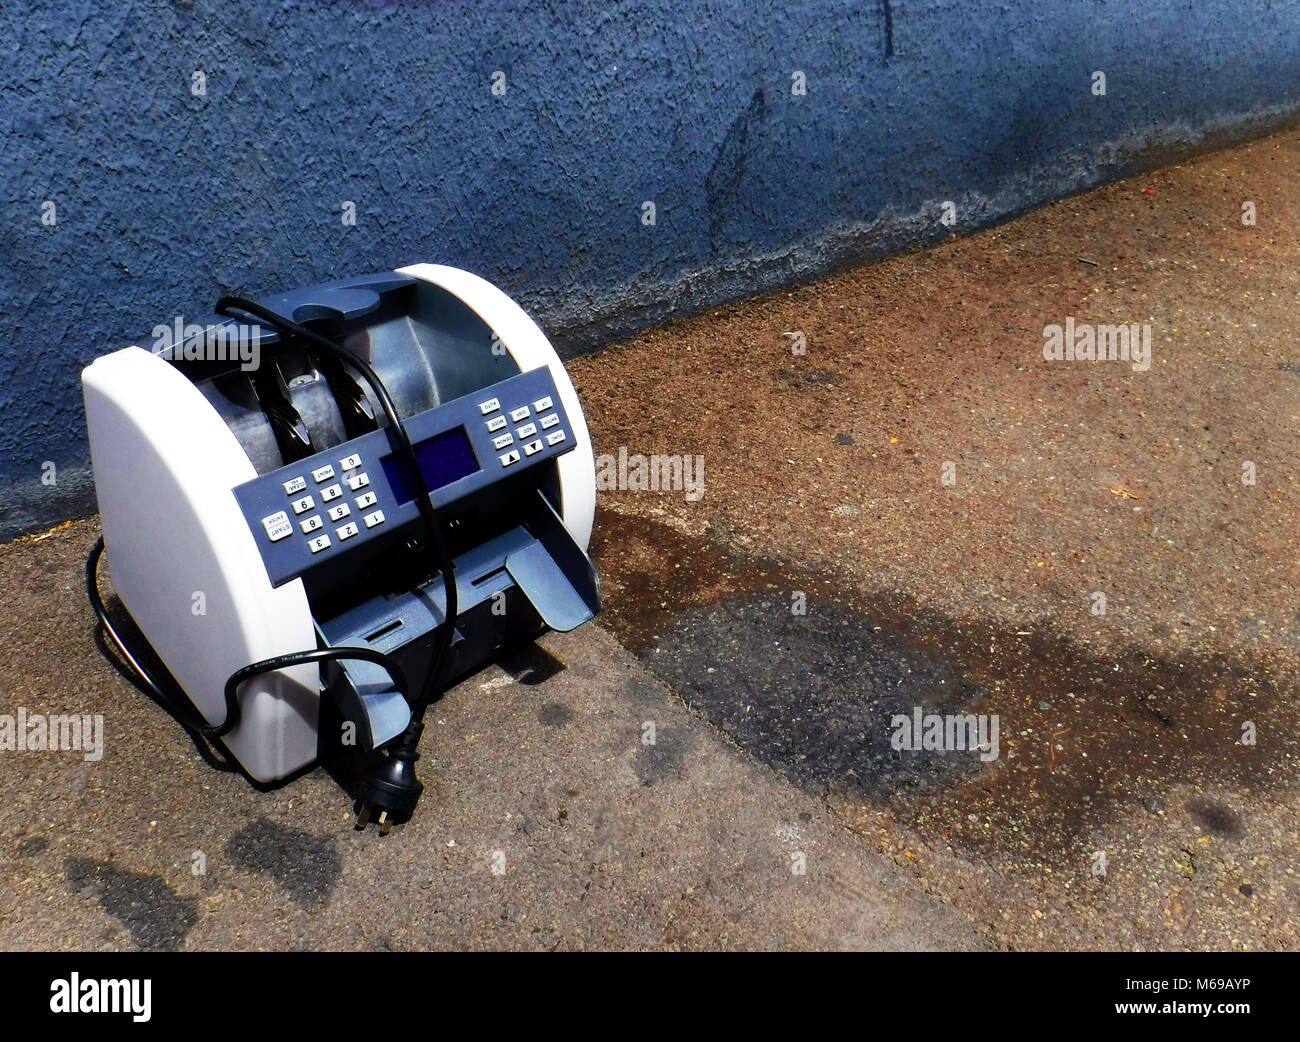 Feeling unwanted. Discarded office machine pavement Stock Photo